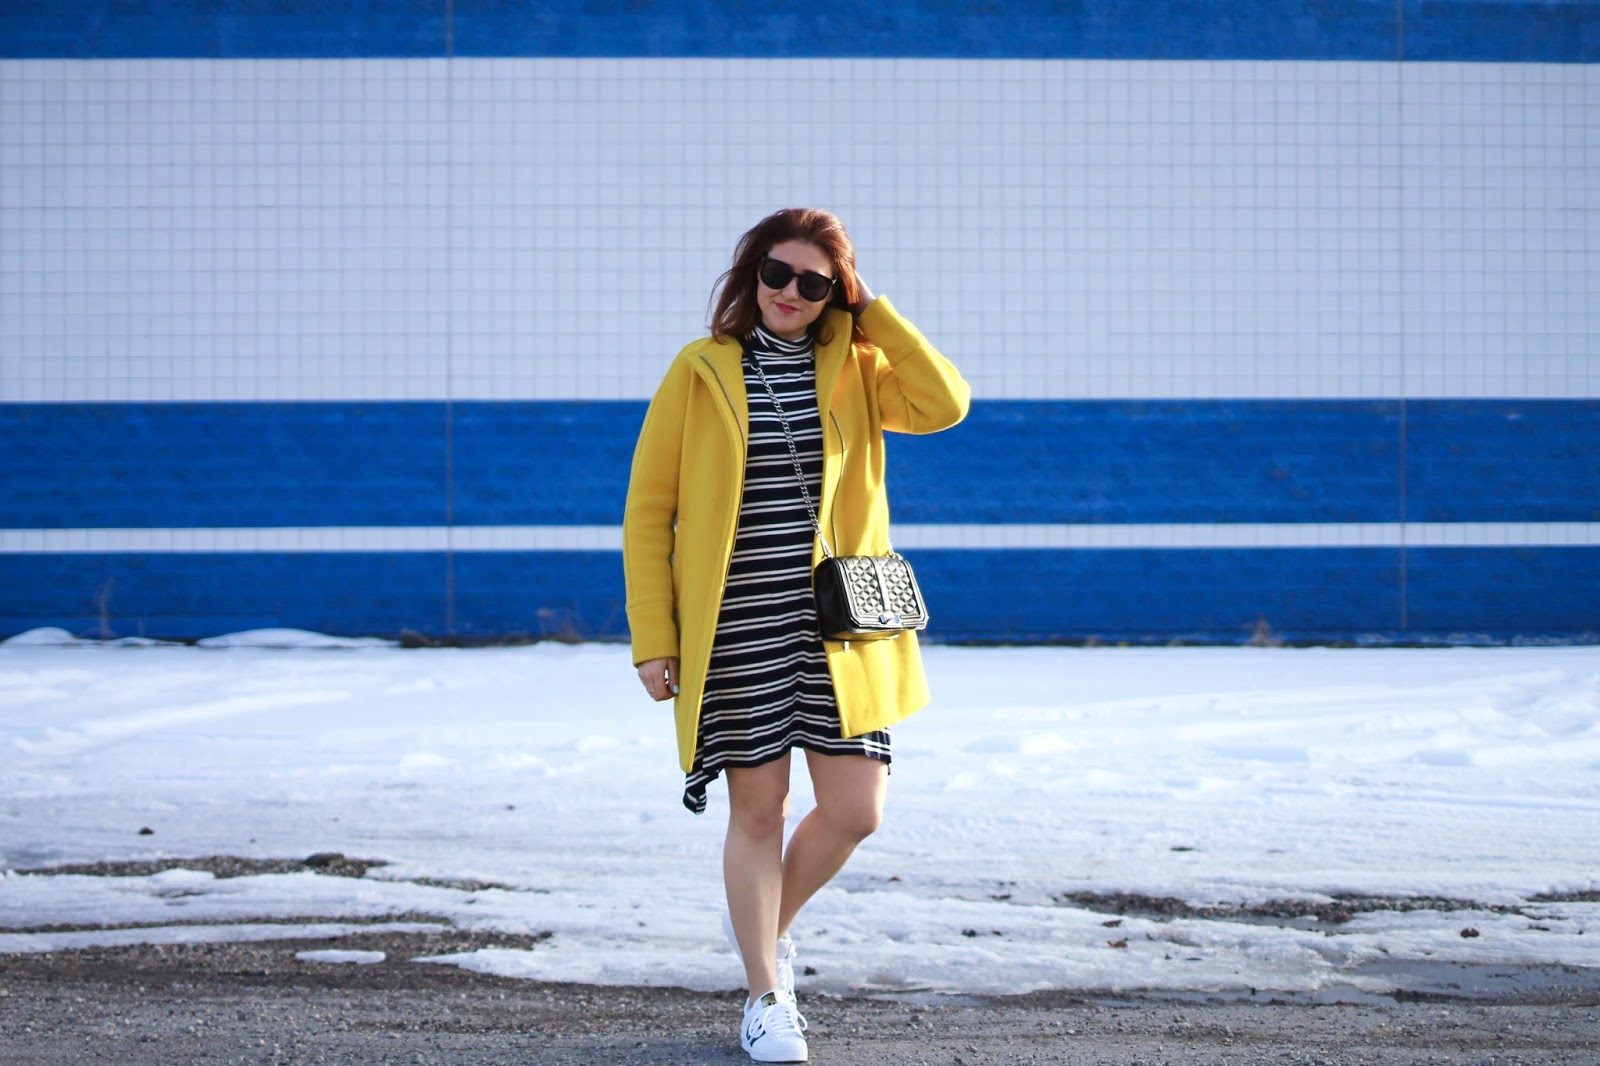 Golden Sun cocoon coat by j crew with a super soft and comfortable casual dress from Anthropologie. Looks great with adidas Classics and the rebecca Minkoff love crossbody chain strap bag in black. Easy date night outfit